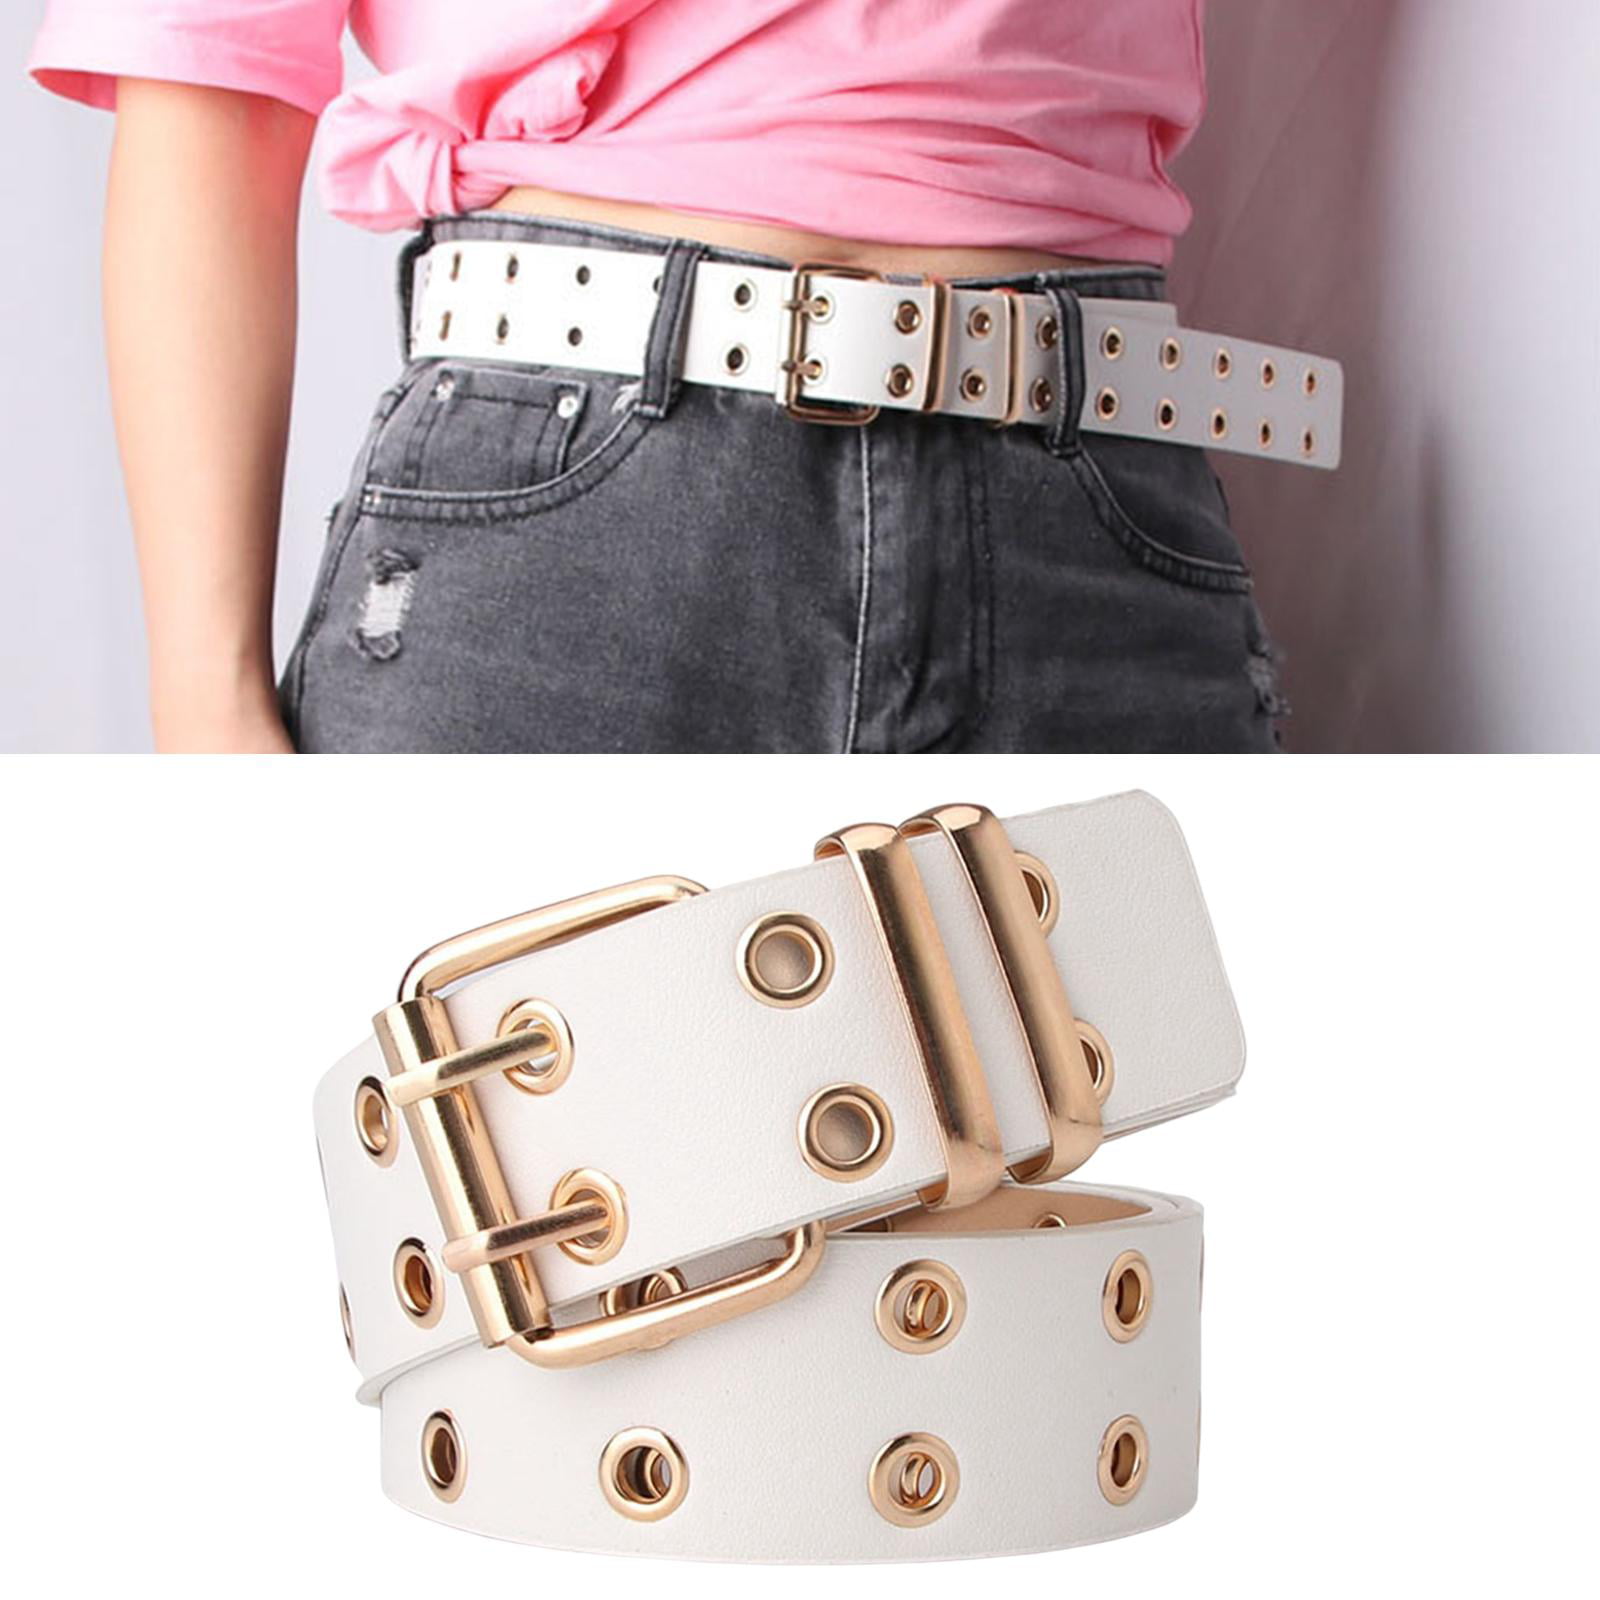 Tongina Double Grommet Punk Belt, Vintage Gothic Adjustable PU Leather Fashion Hollow Eyelet Accessories, with for Pants Jeans. , White, Women's, Size